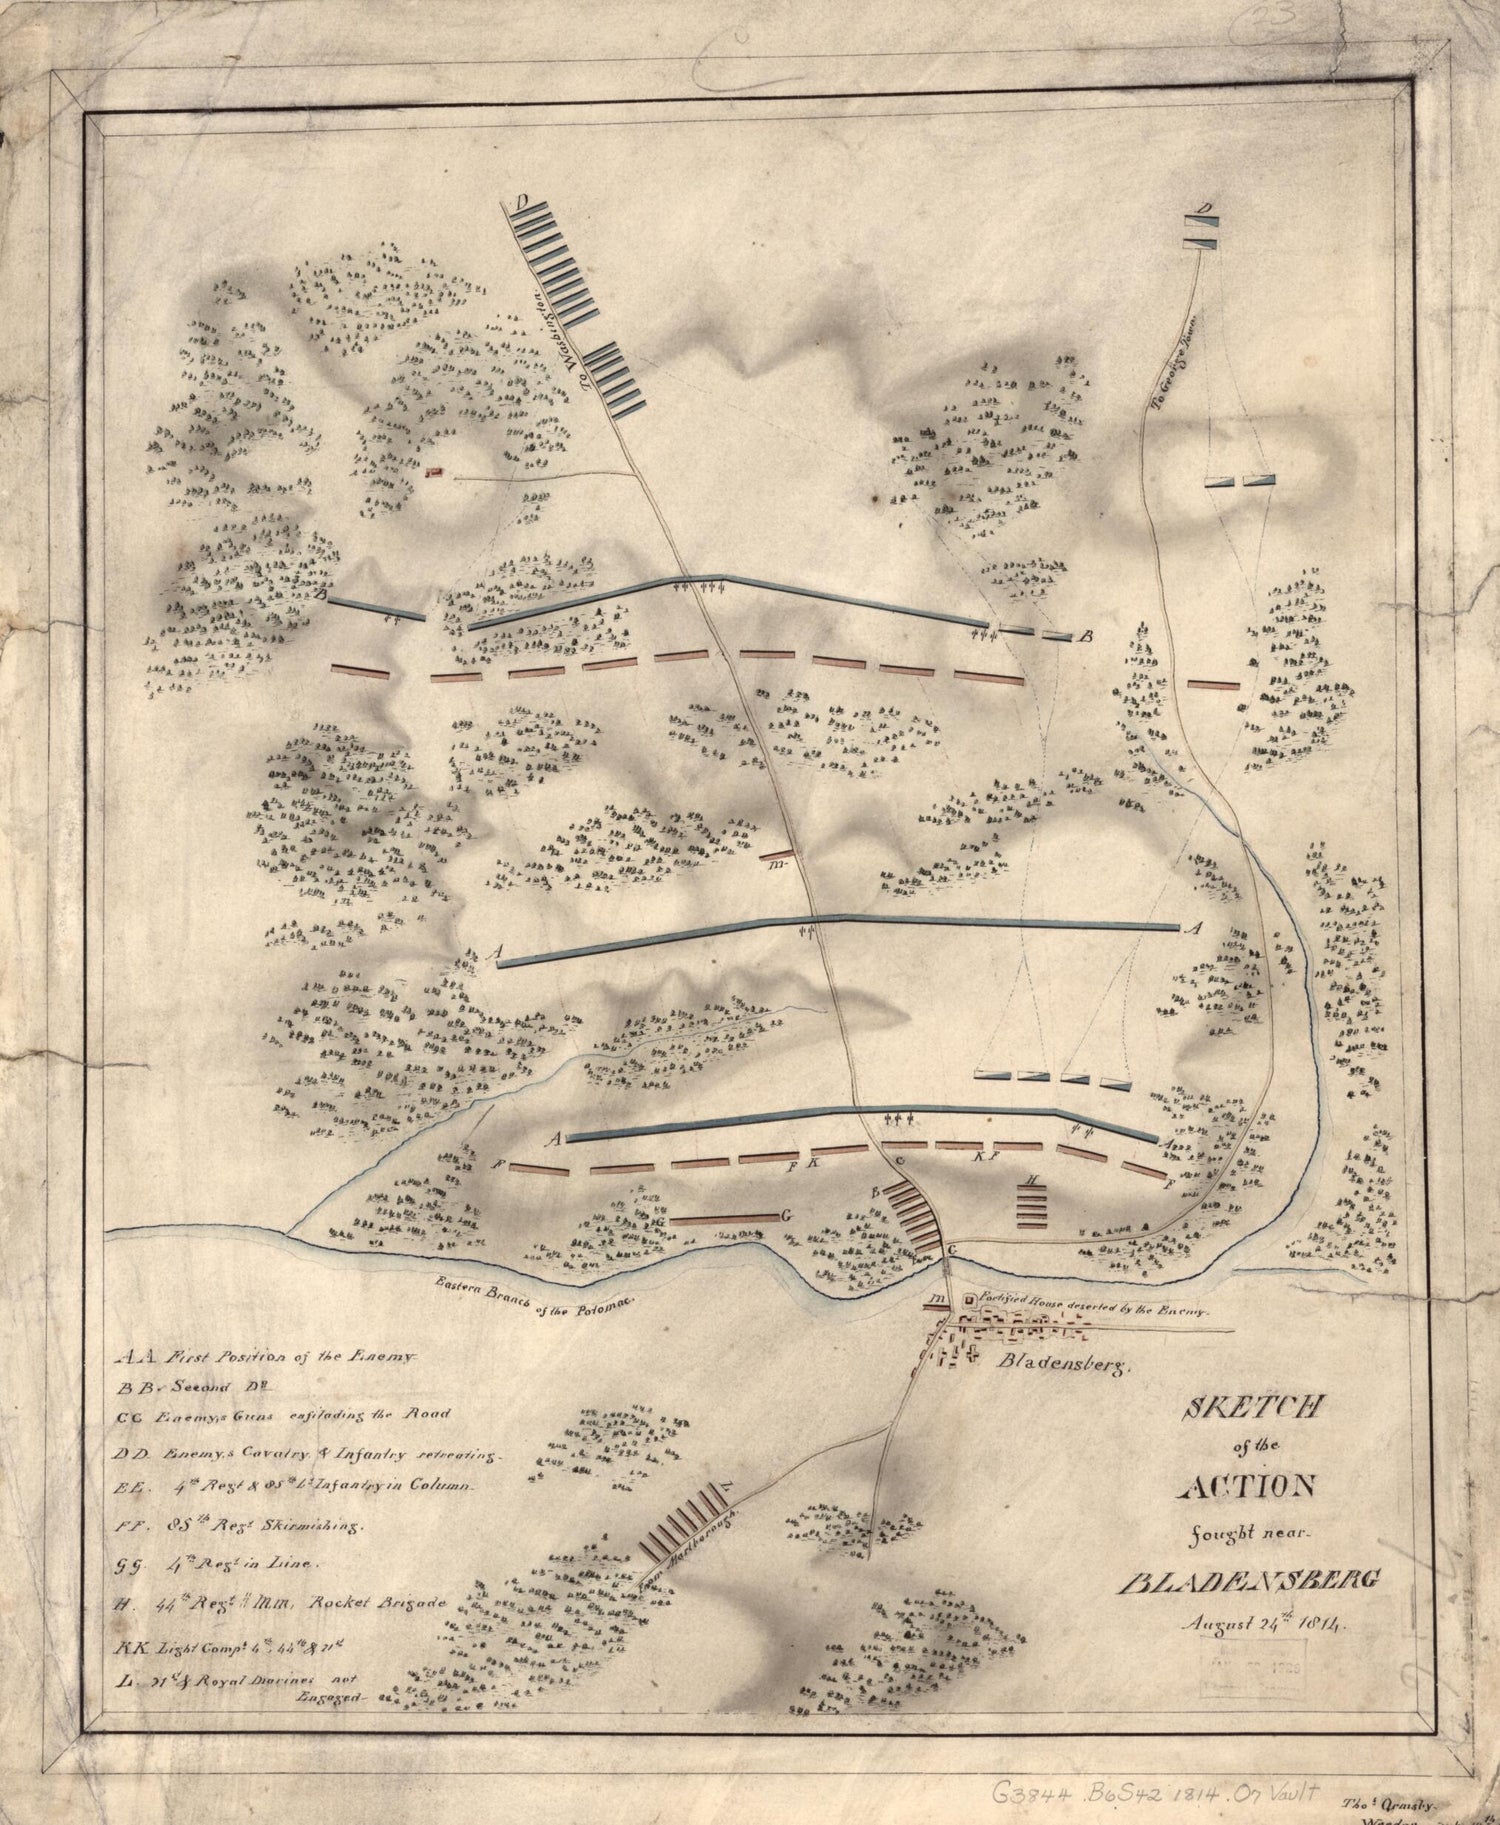 This old map of Sketch of the Action Fought Near Bladensberg i.e. Bladensburg, August 24th, 1814 from 1816 was created by Thos Ormsby in 1816